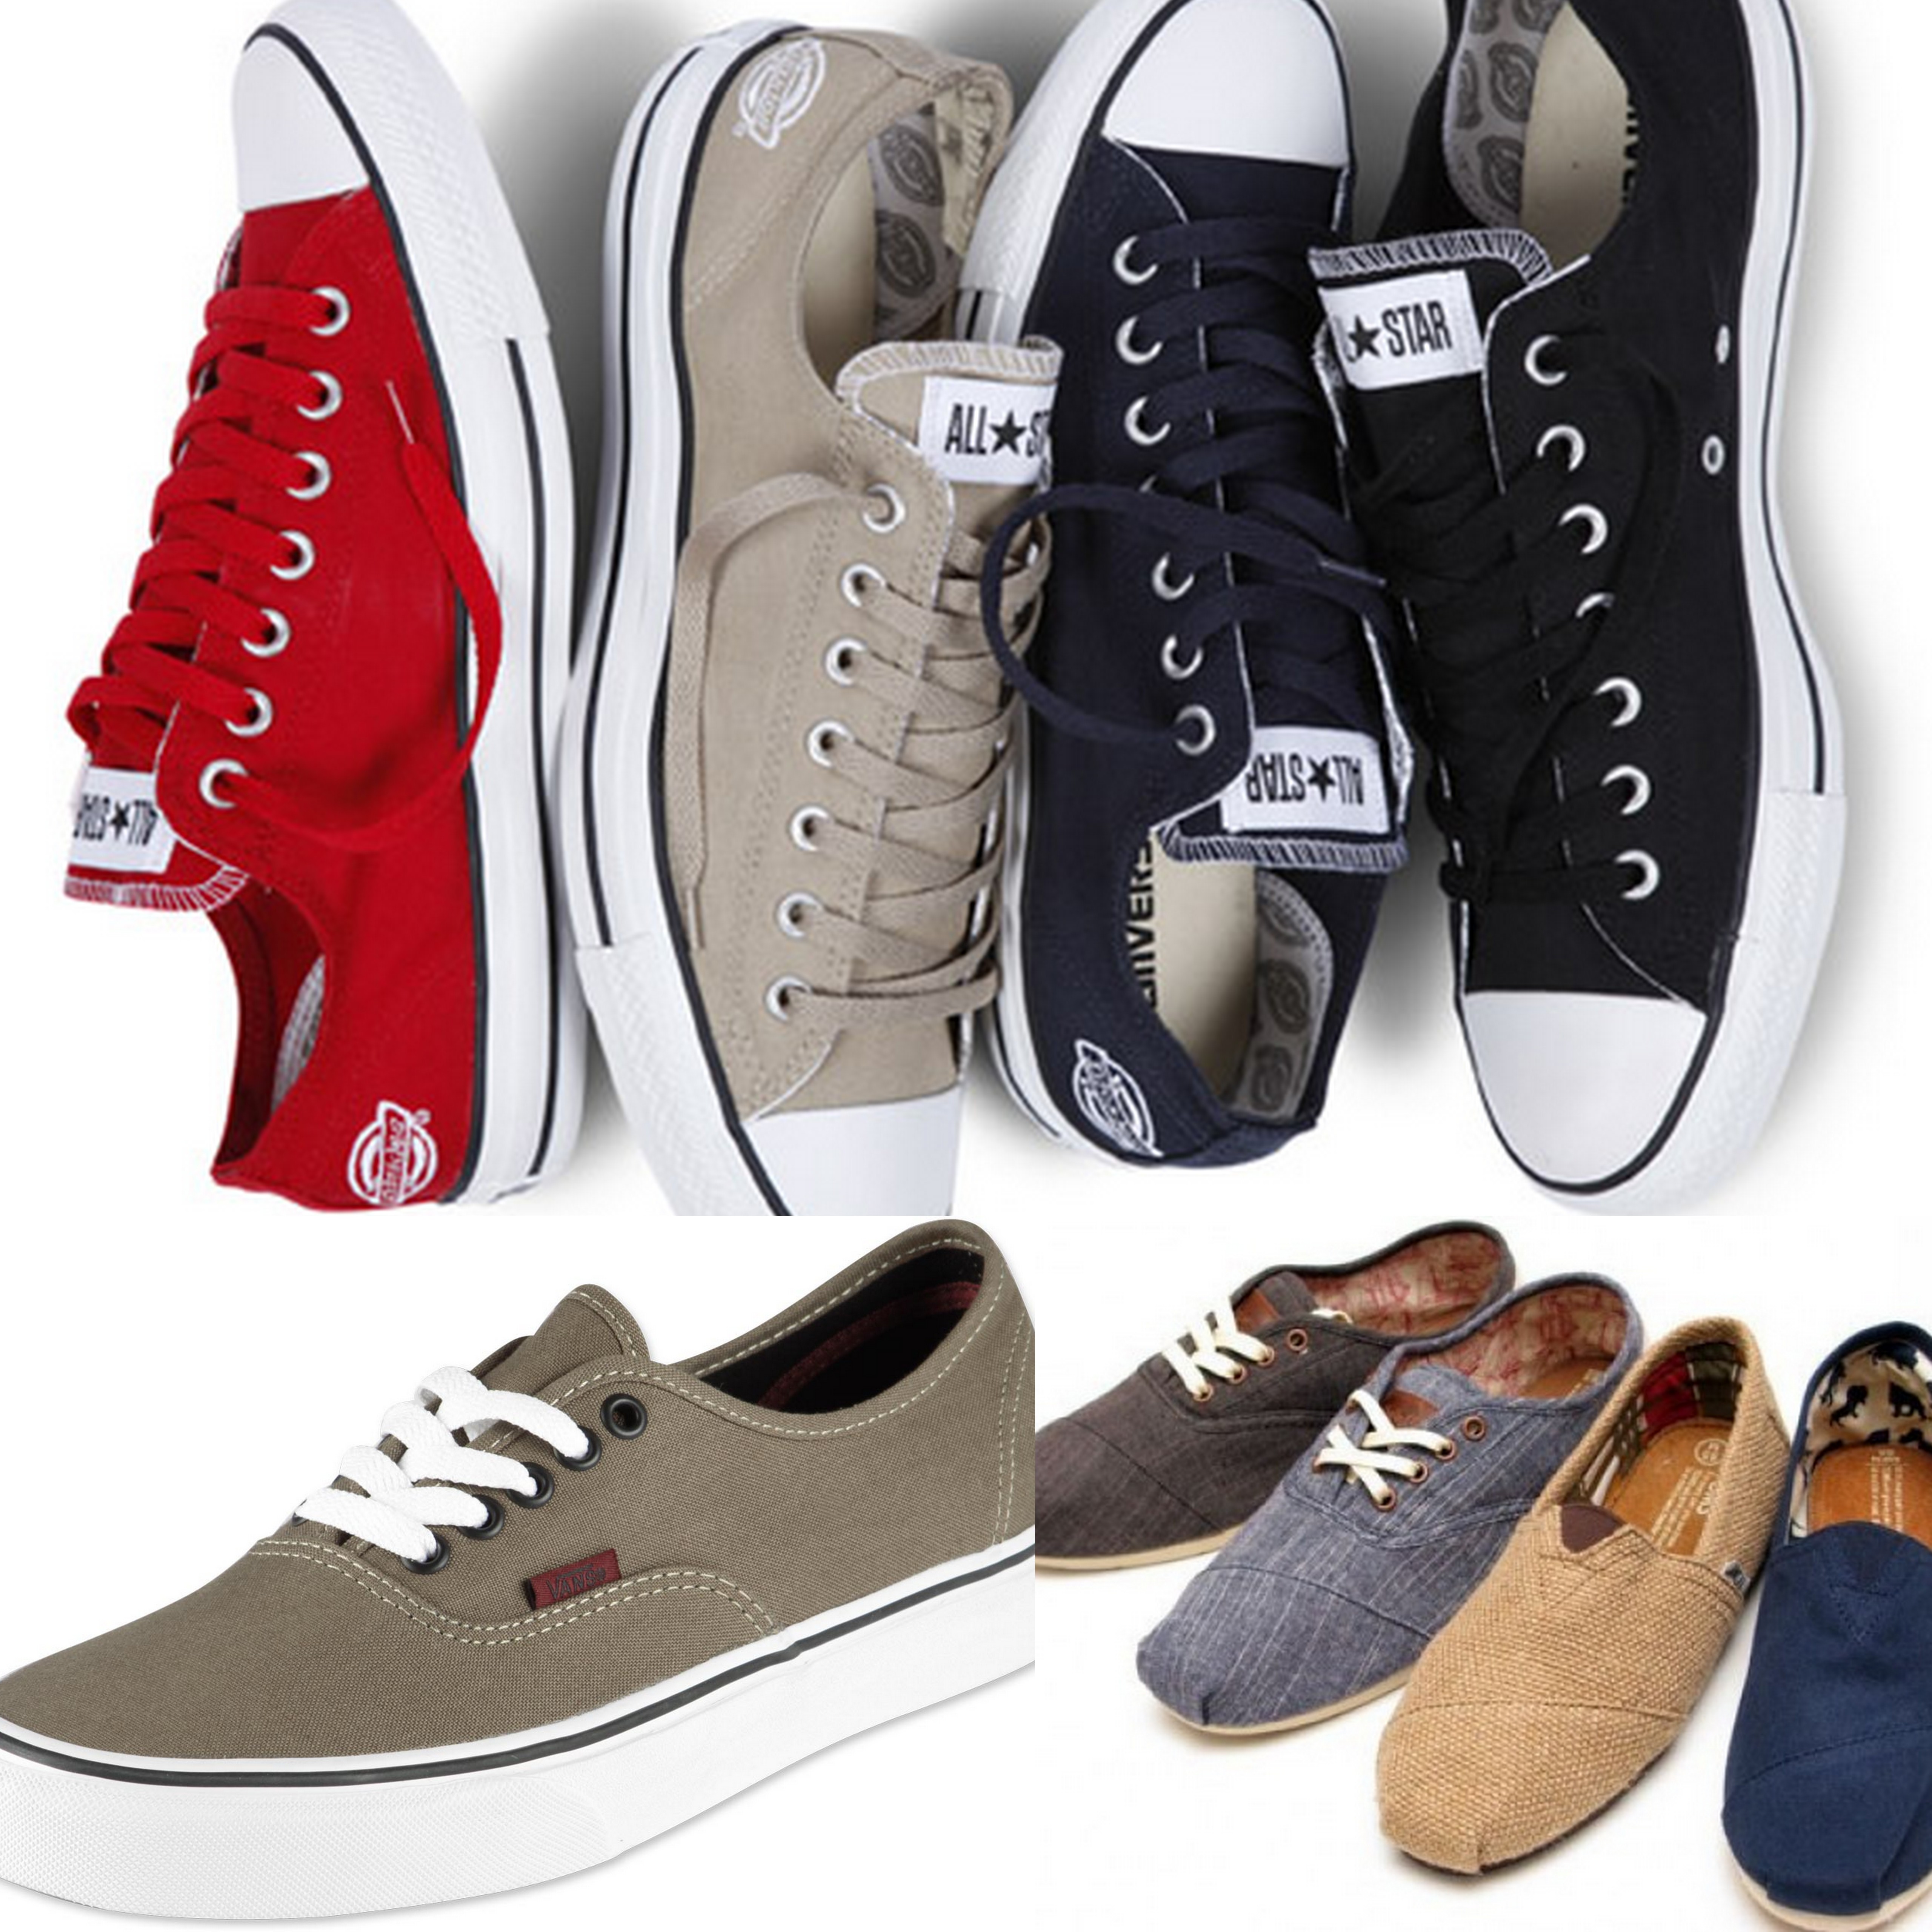 converse or toms